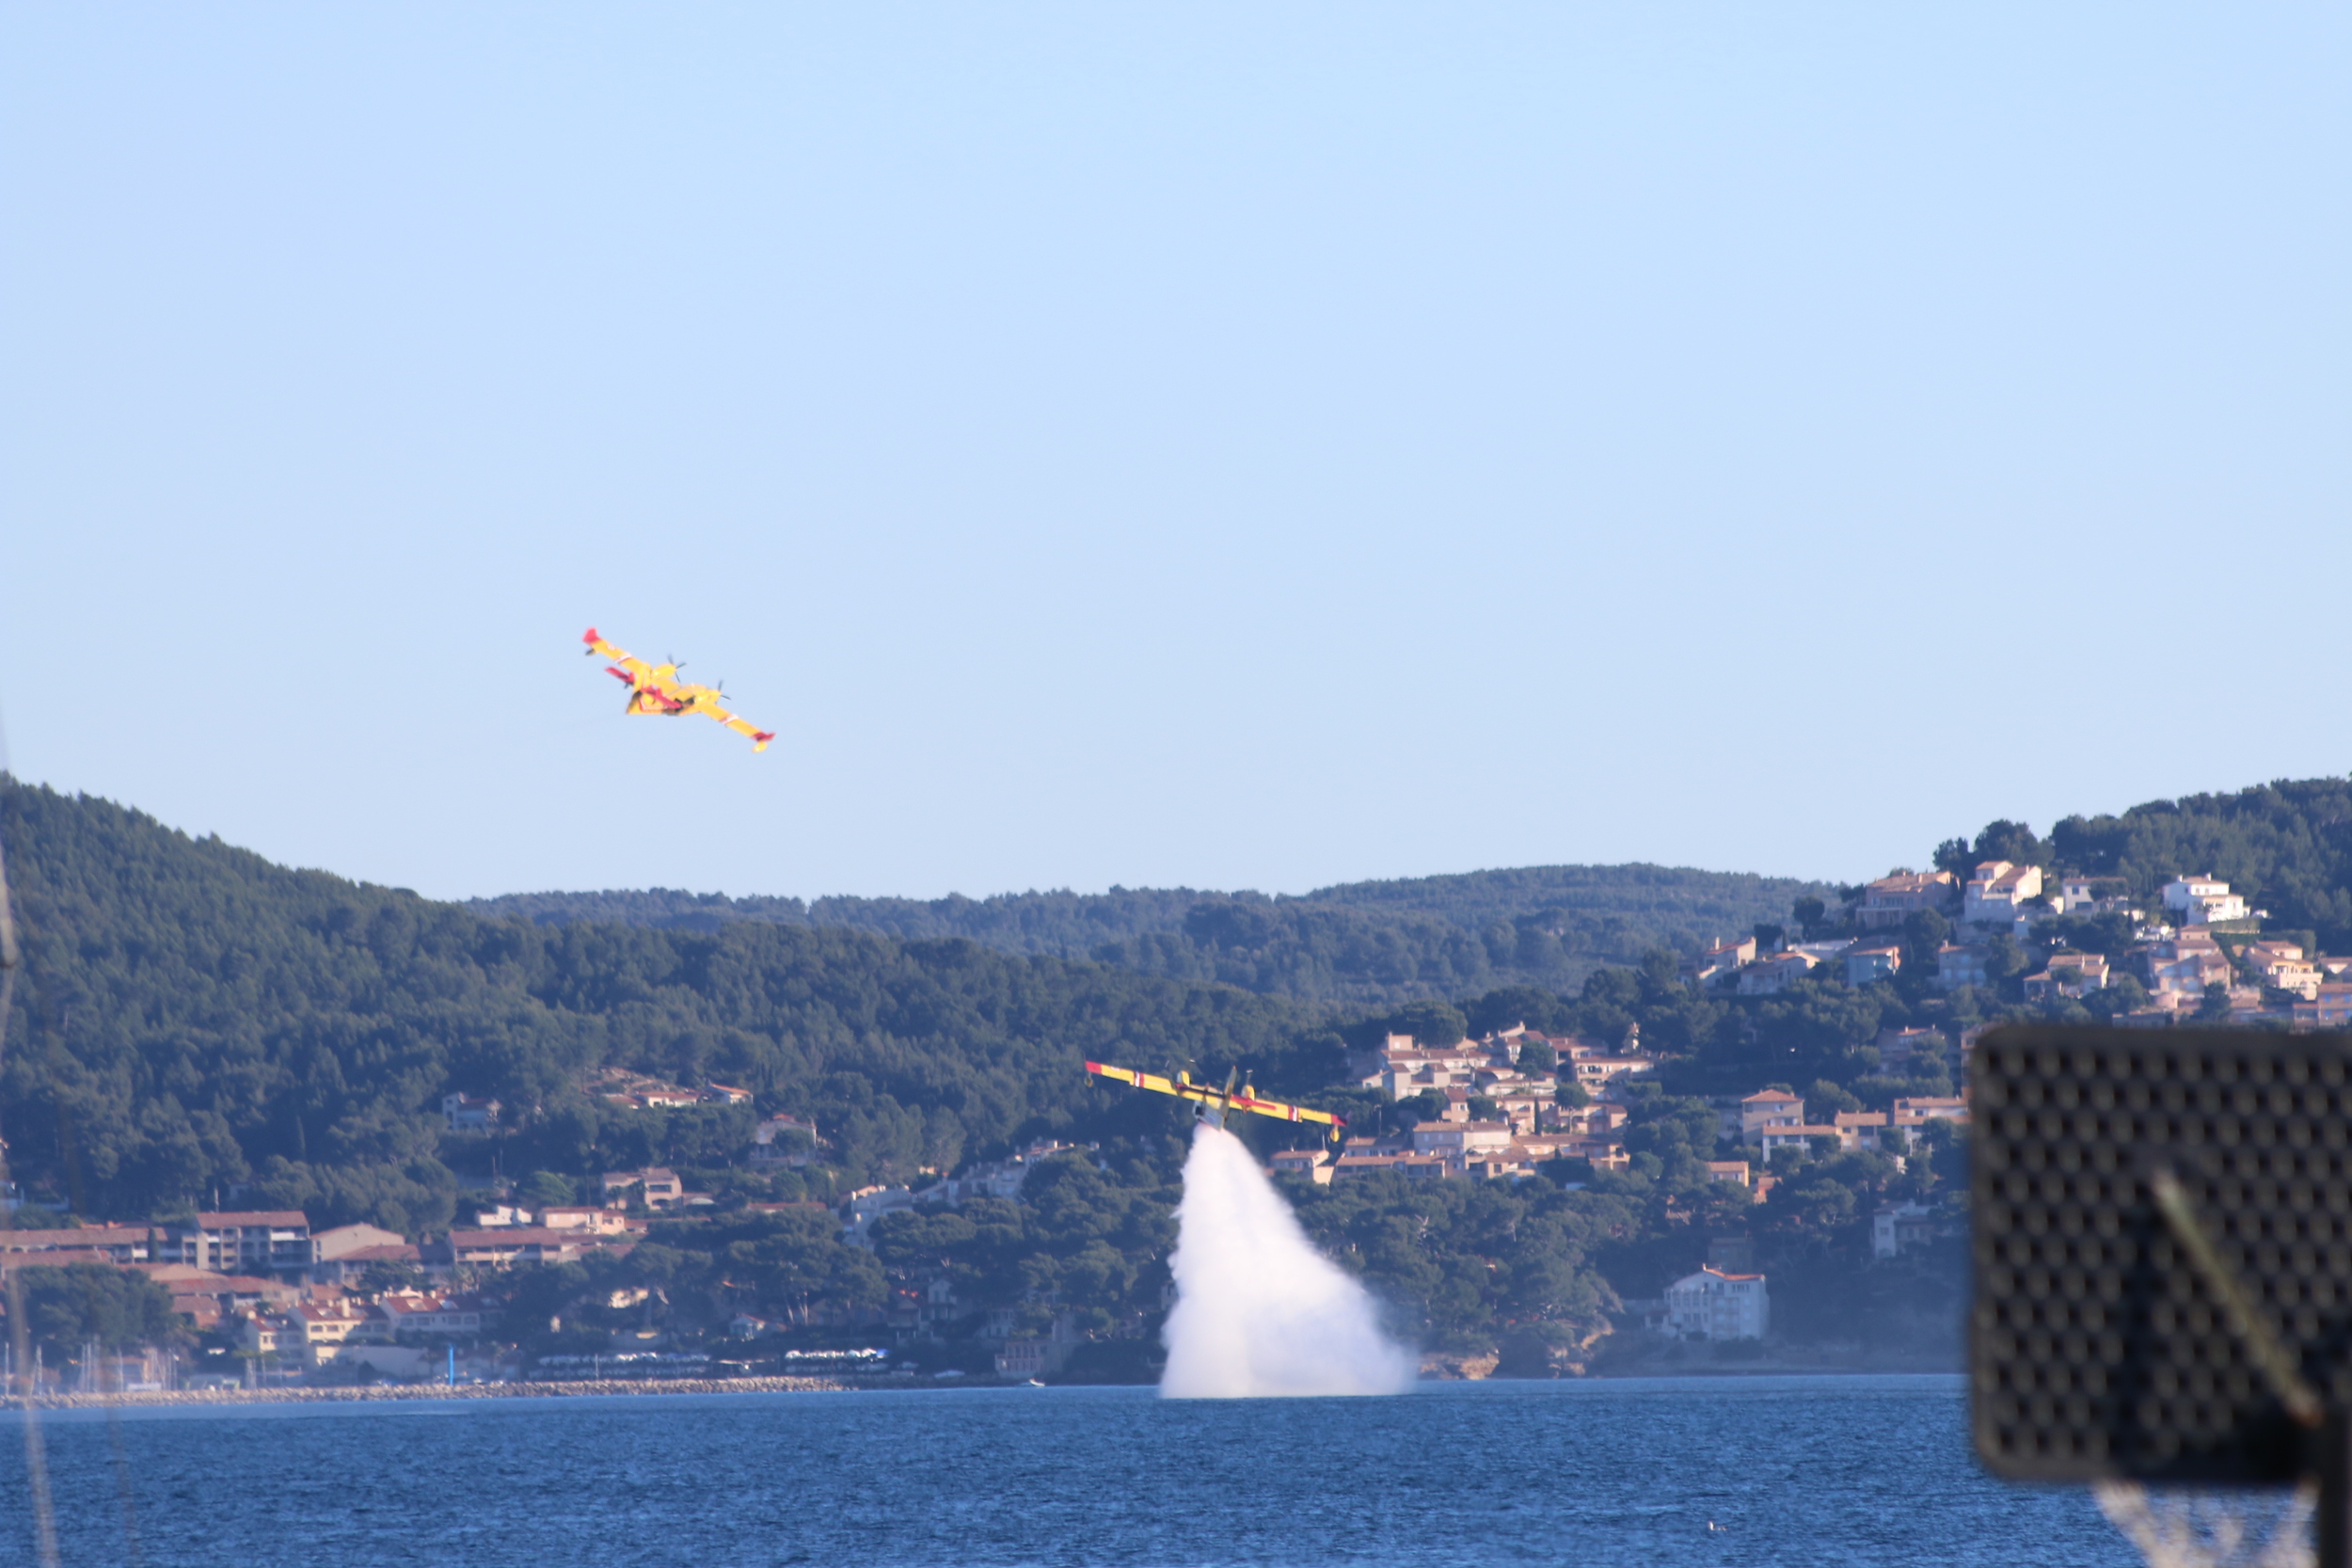 La Ciotat: fire fighting planes practicing filling and emptying water tanks.